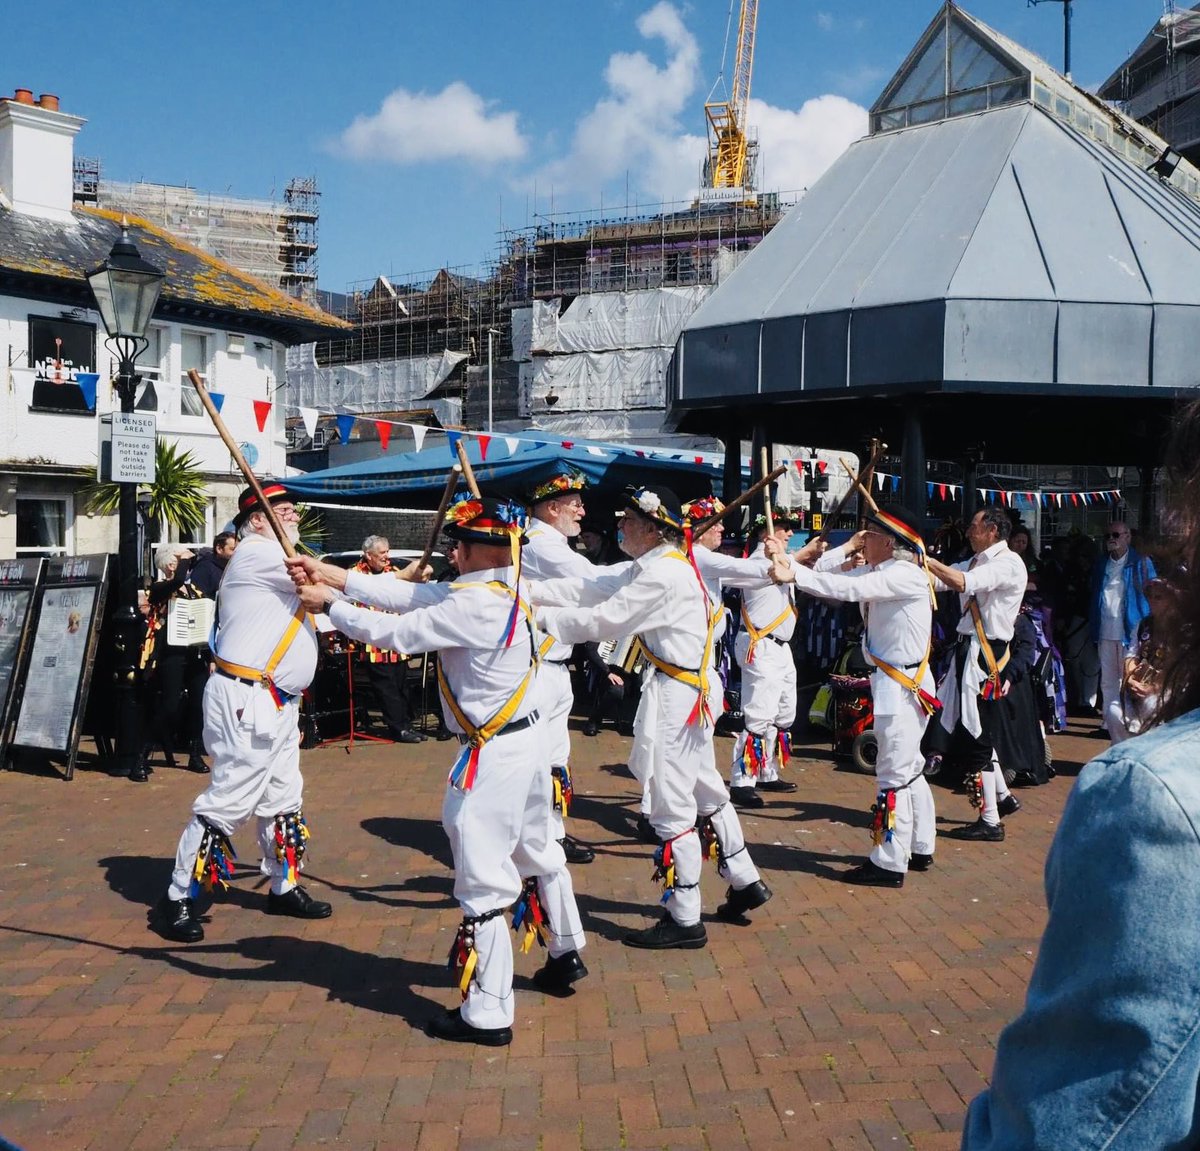 🏴󠁧󠁢󠁥󠁮󠁧󠁿🎶 Enjoy Morris dancing on The Quay in Poole this Sunday (April 21st).

Next to The Fish Shambles, The Lord Nelson, Jolly Sailor and Oriel Restaurant from 12pm. 

⭐️Everyone welcome.⭐️

#poolebid #discoverpoole #StGeorgesDay #poole #dorset #freeevents #morrisdancing